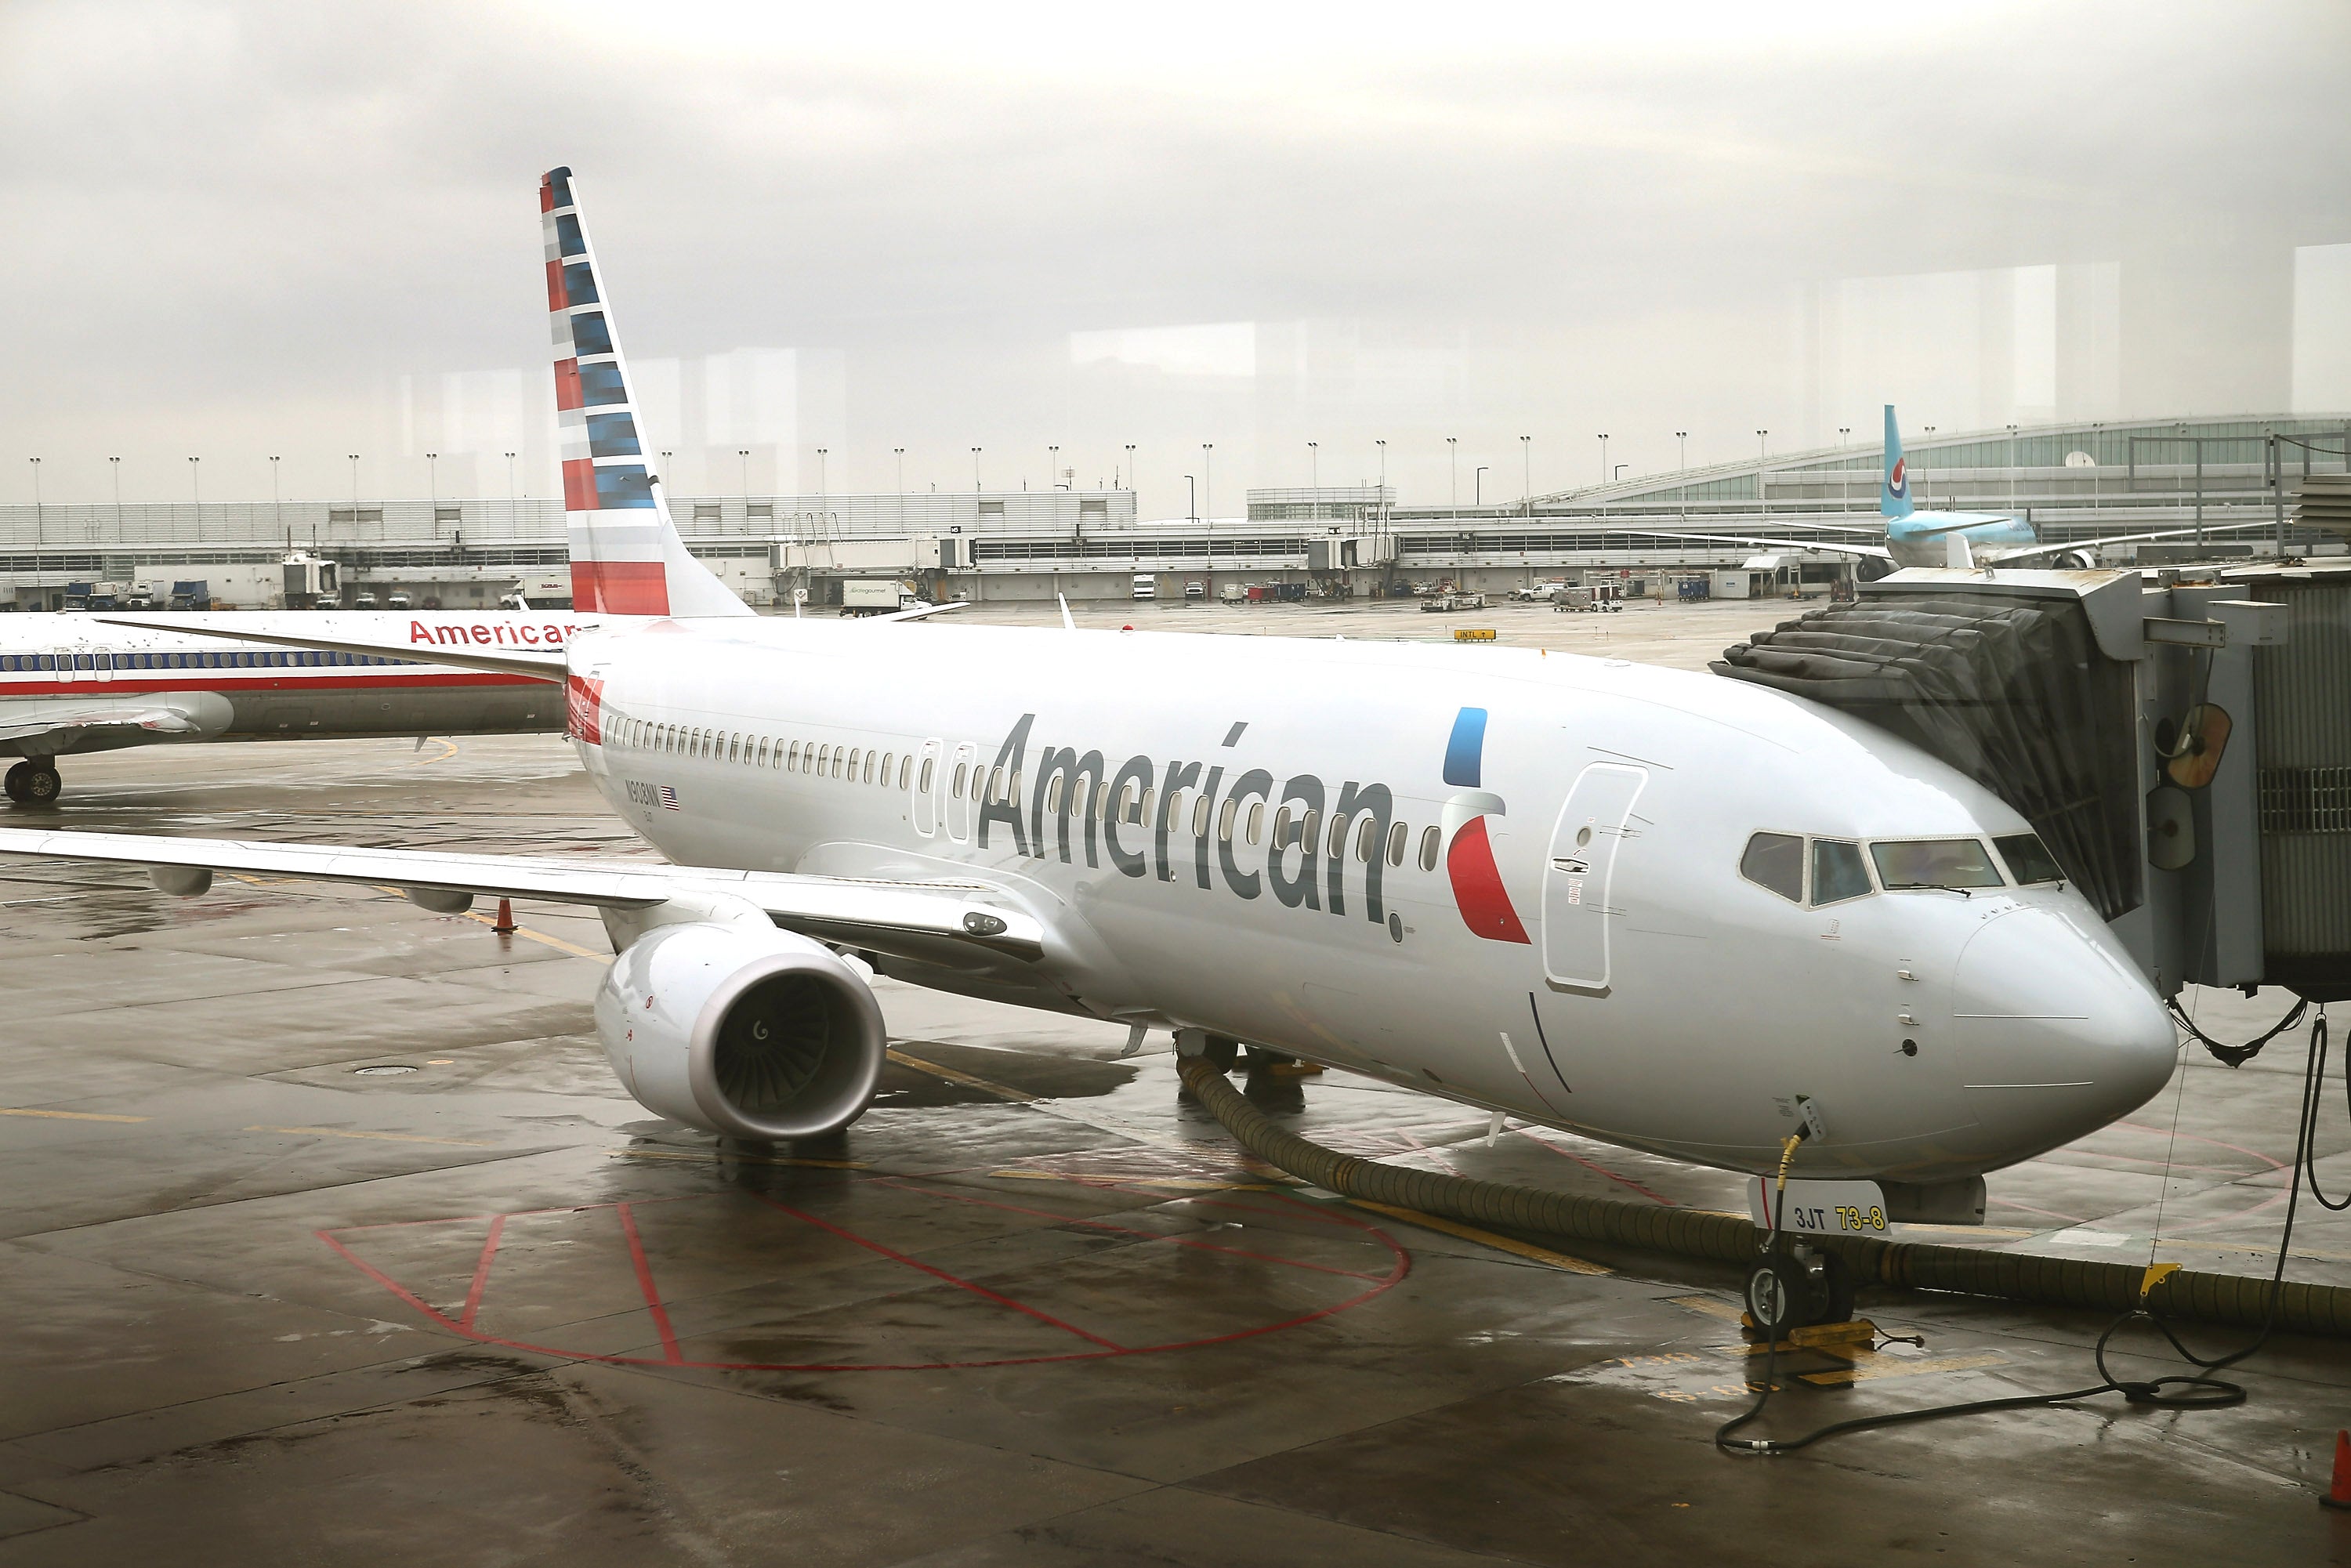 American Airlines Highlights Their Updated Logo On Newly Painted Boeing 737-800's